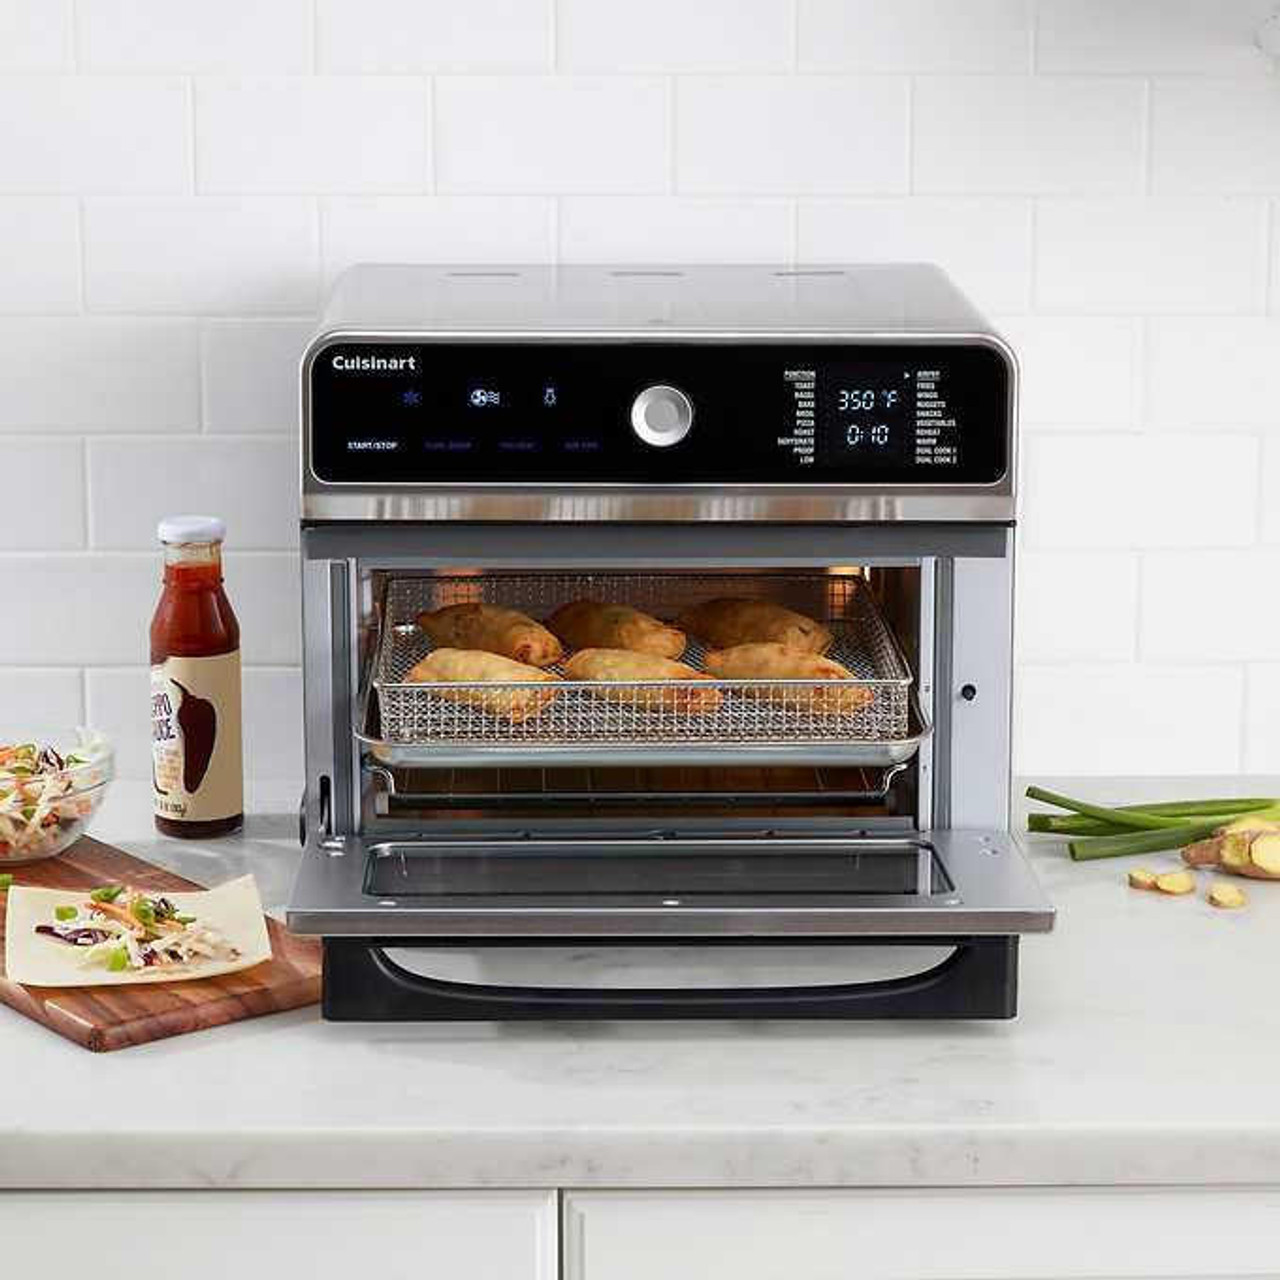 https://cdn11.bigcommerce.com/s-g5ygv2at8j/images/stencil/1280x1280/products/13779/30498/cuisinart-digital-air-fryer-convection-toaster-oven__43385.1694498529.jpg?c=1